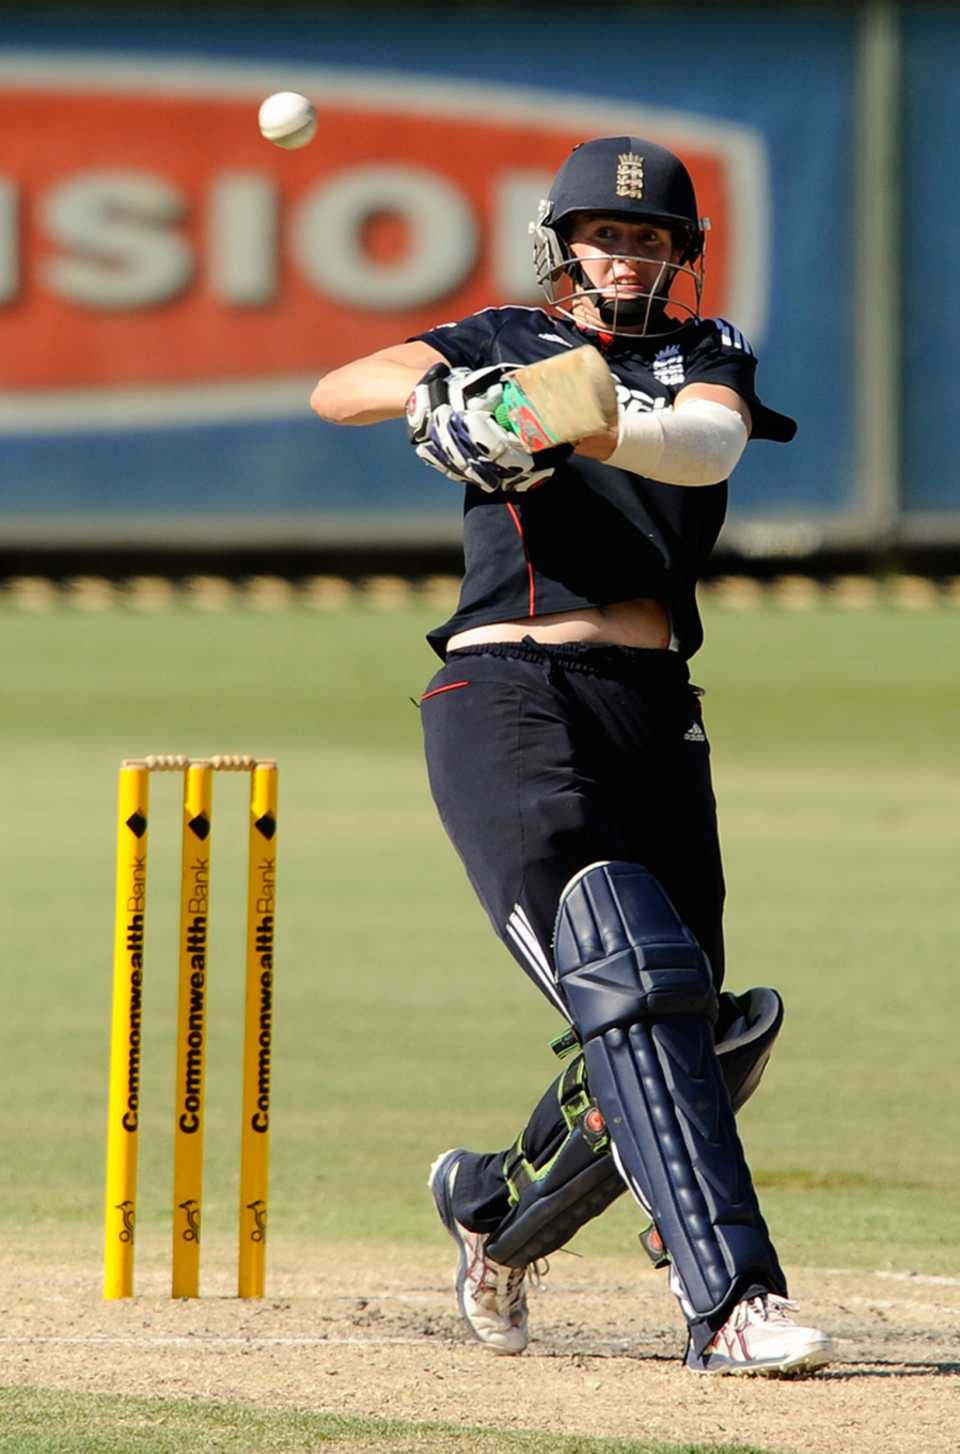 Lydia Greenway top-scored for England with 59